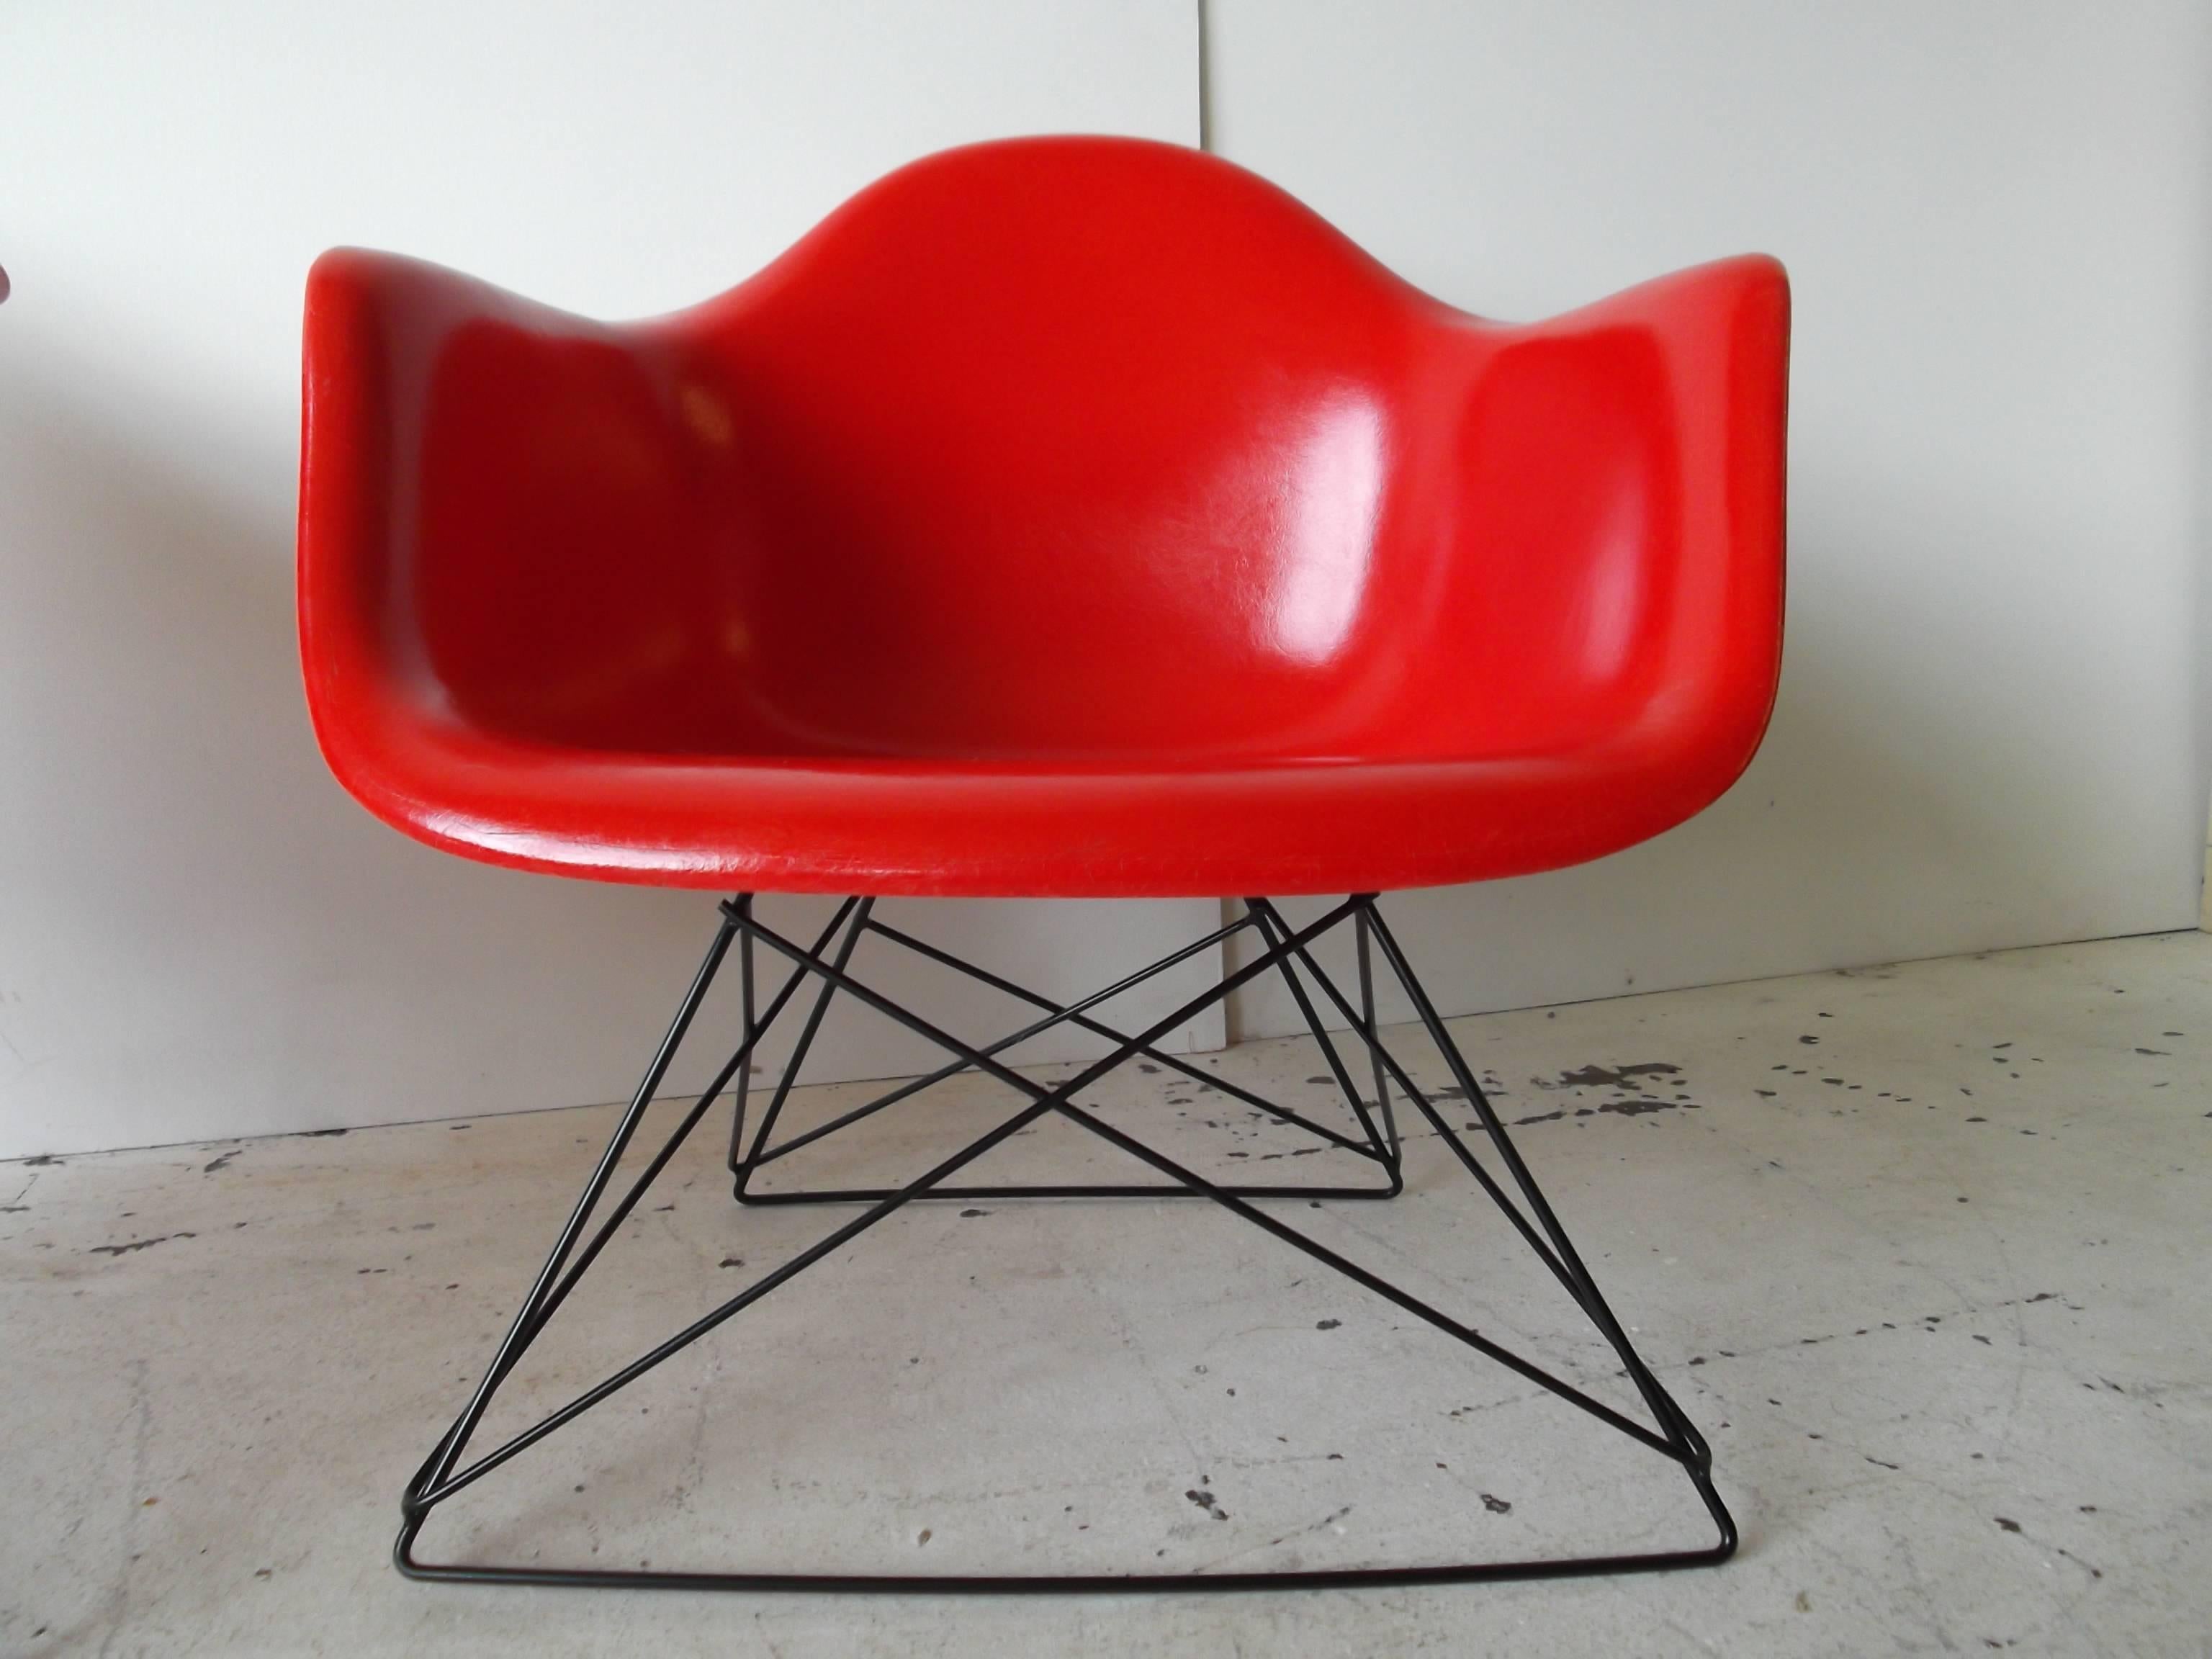 Charles Eames Herman Miller True Red Fiberglass Chairs In Good Condition For Sale In Tulsa, OK